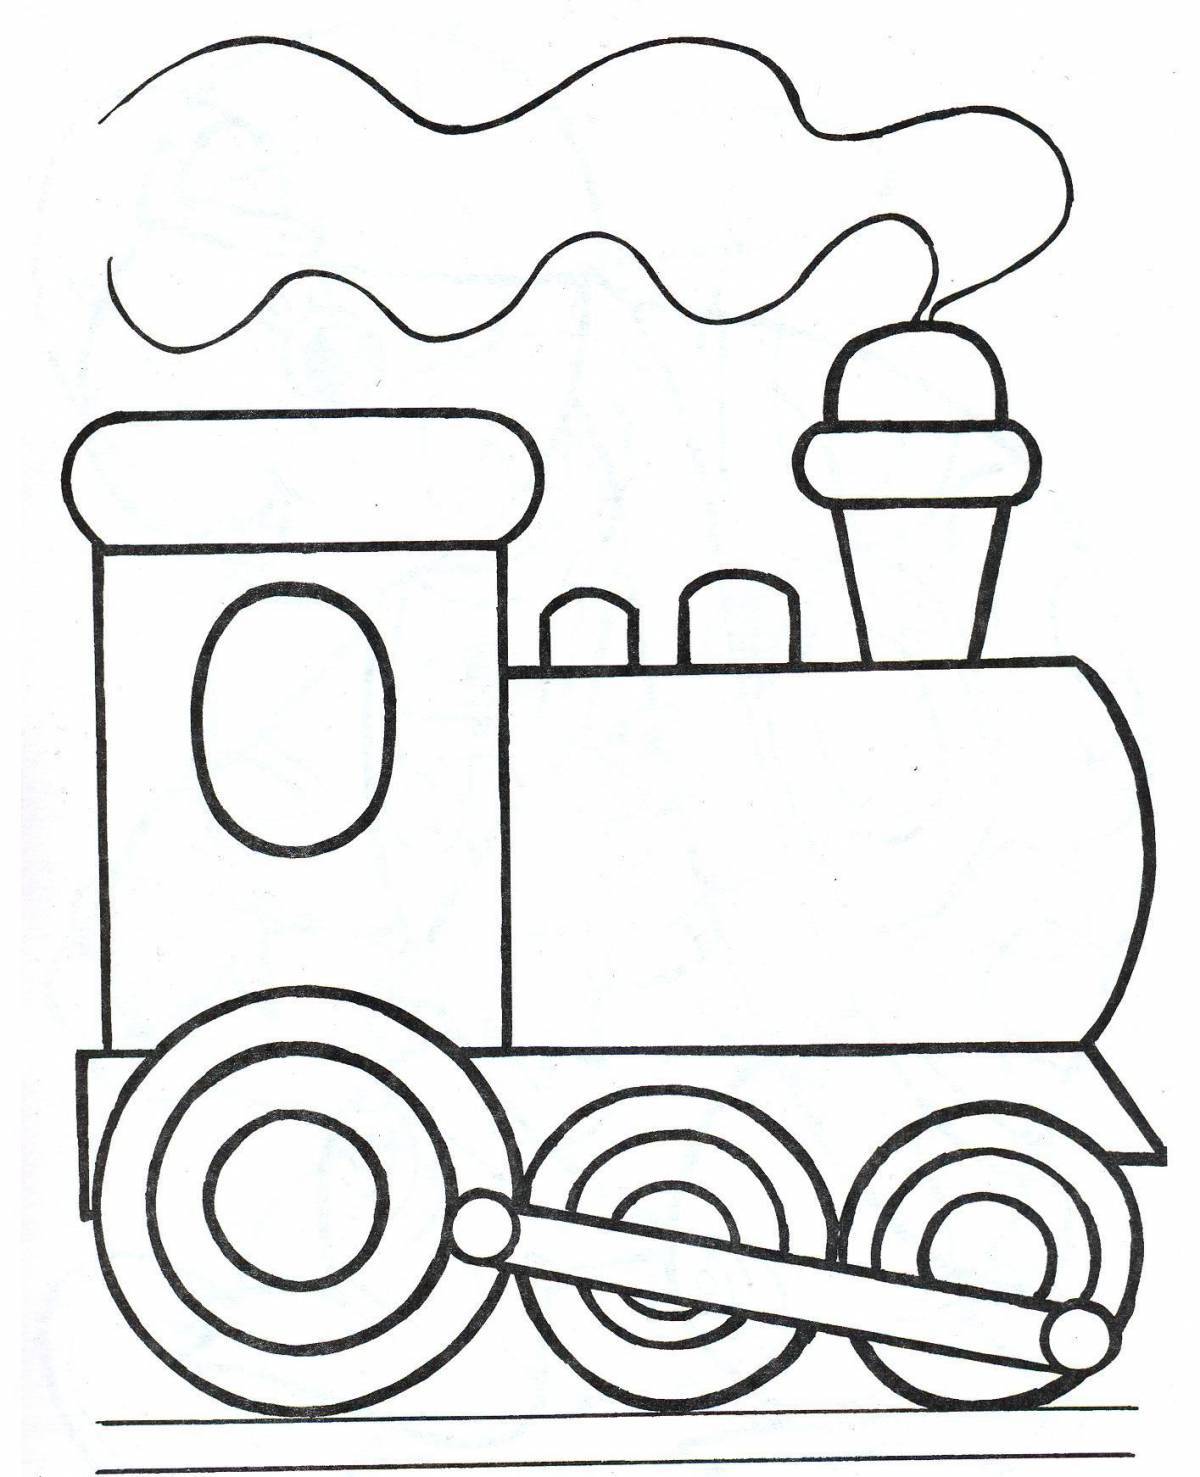 Fun coloring for boys 3-4 years old